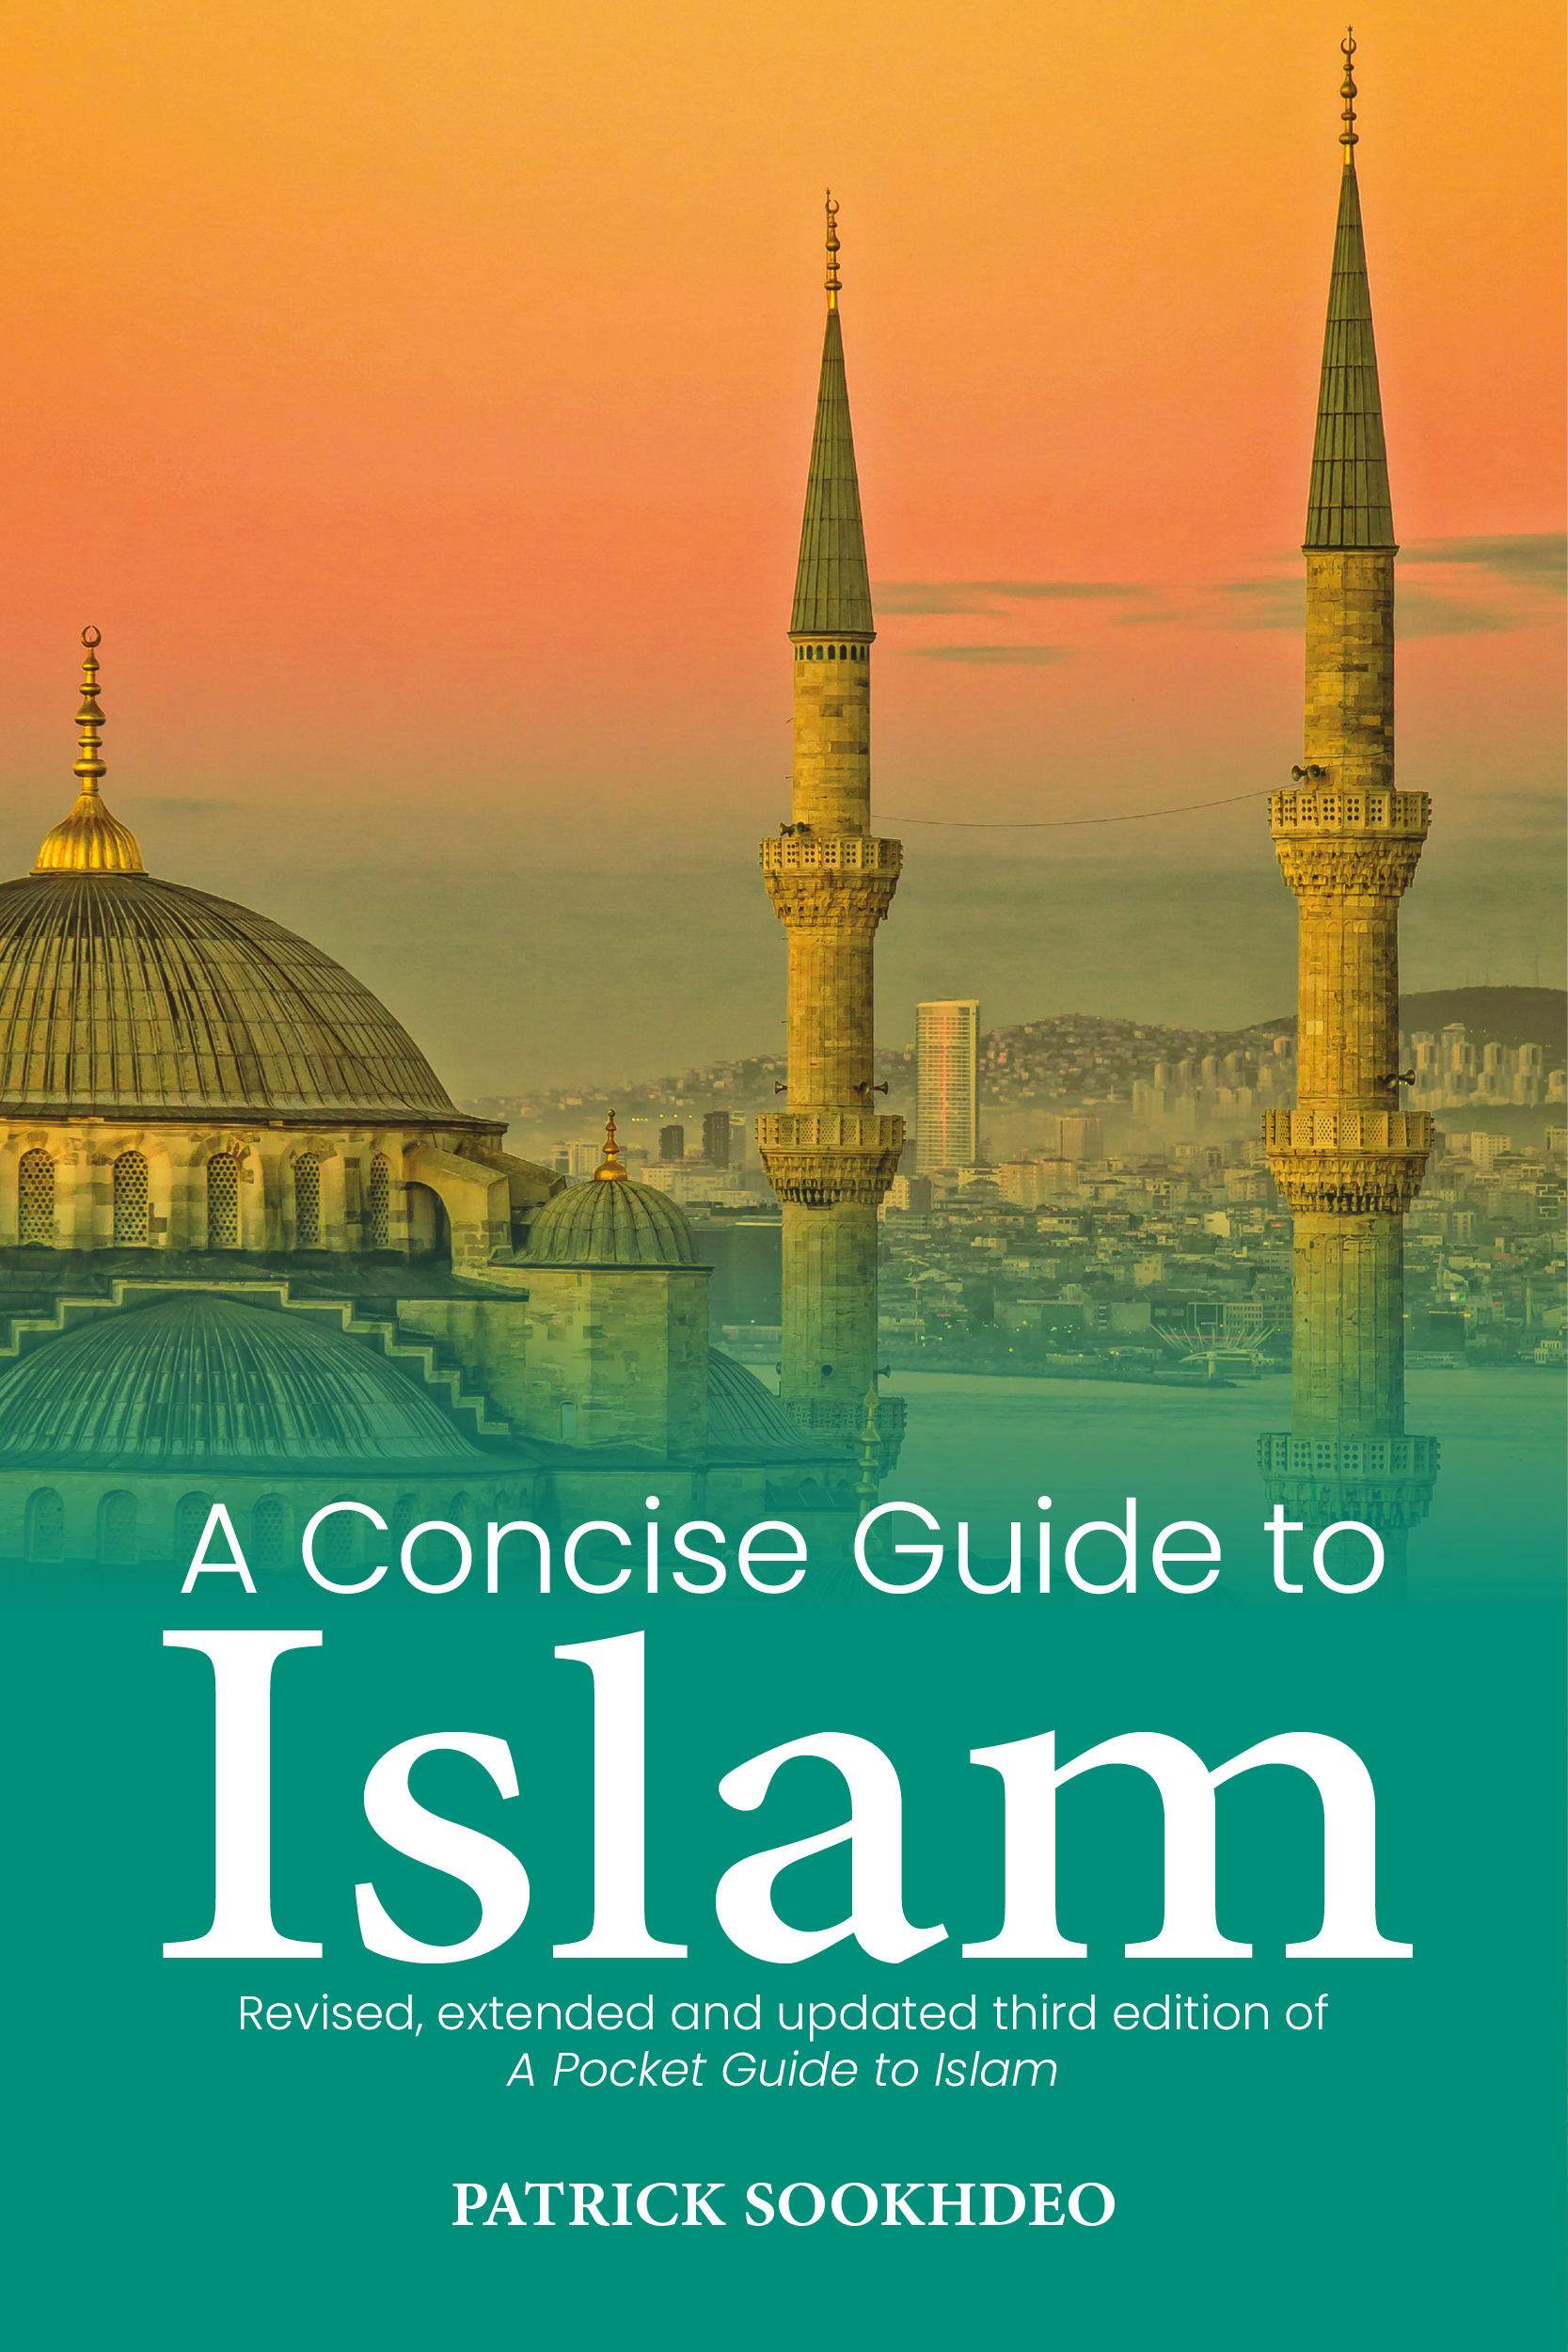 A Concise Guide to Islam